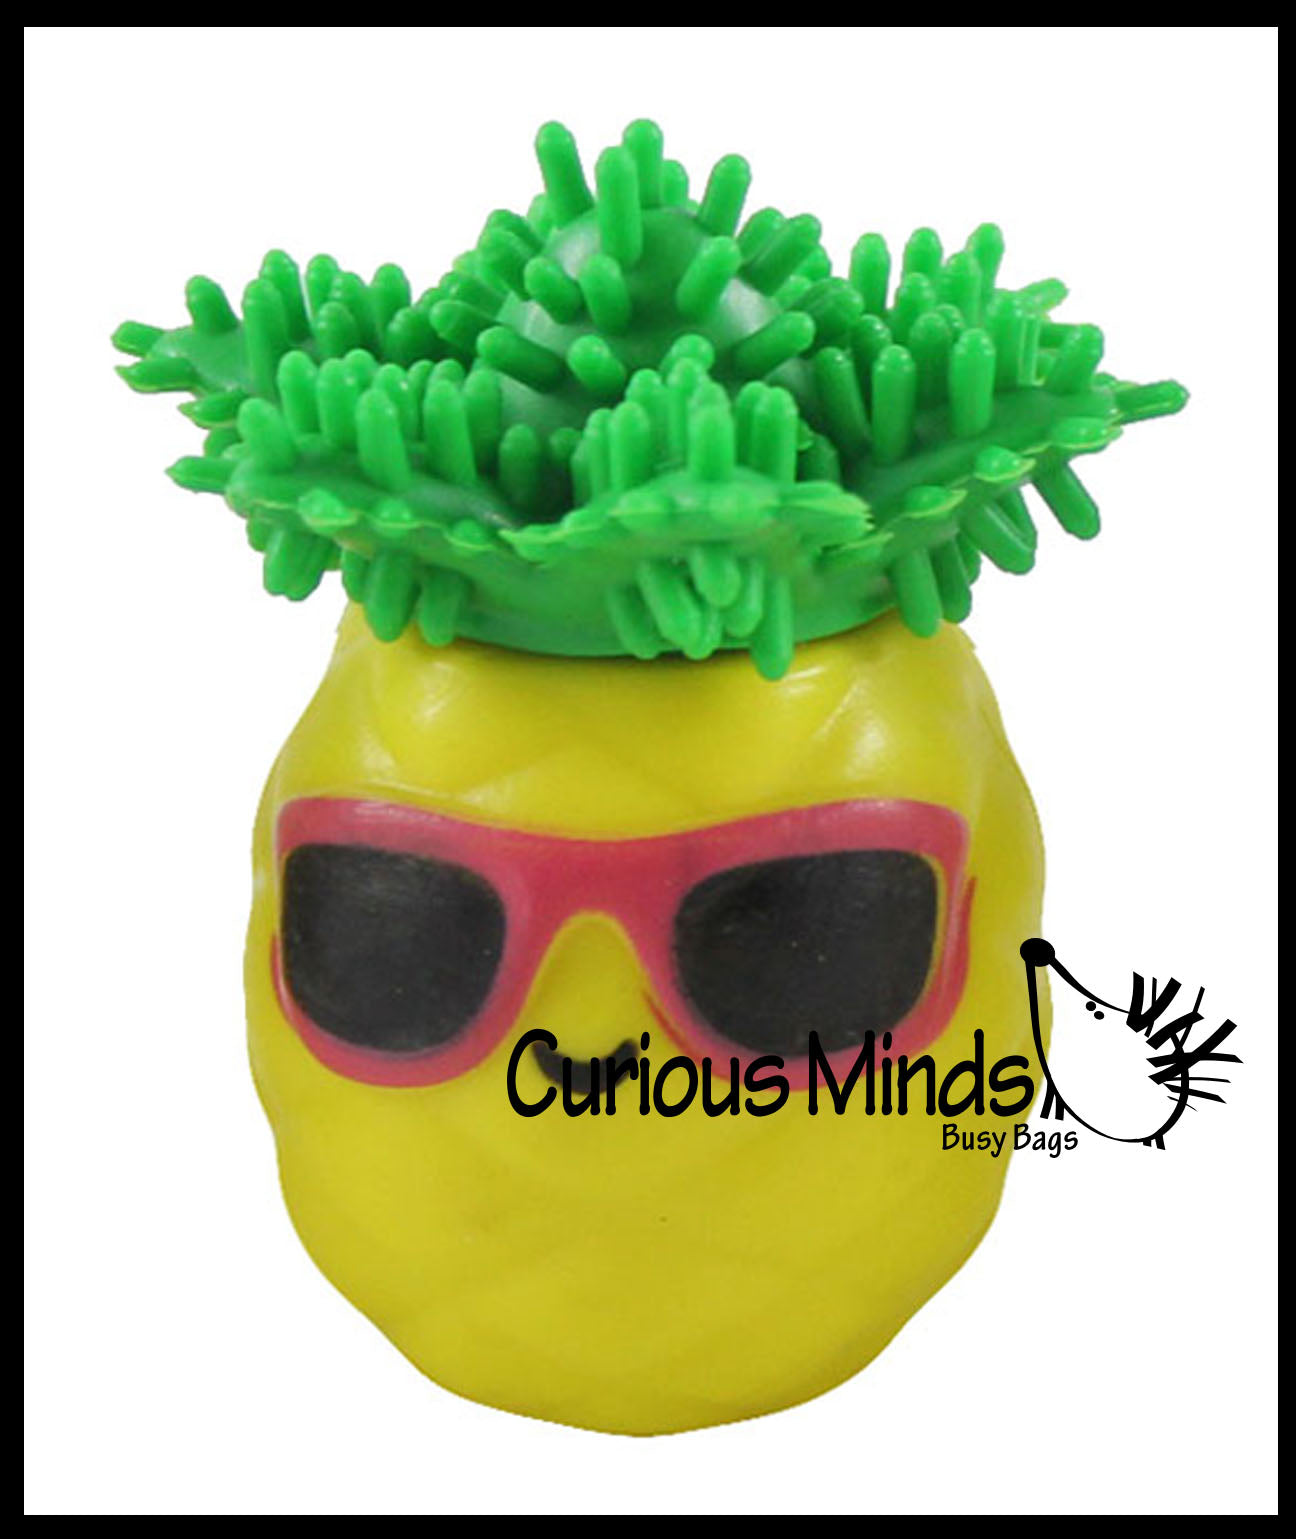 LAST CHANCE - LIMITED STOCK - Cute Pineapple Hedge Balls -  Spiky Wooly Porcupine Balls - Sensory Novelty Toy